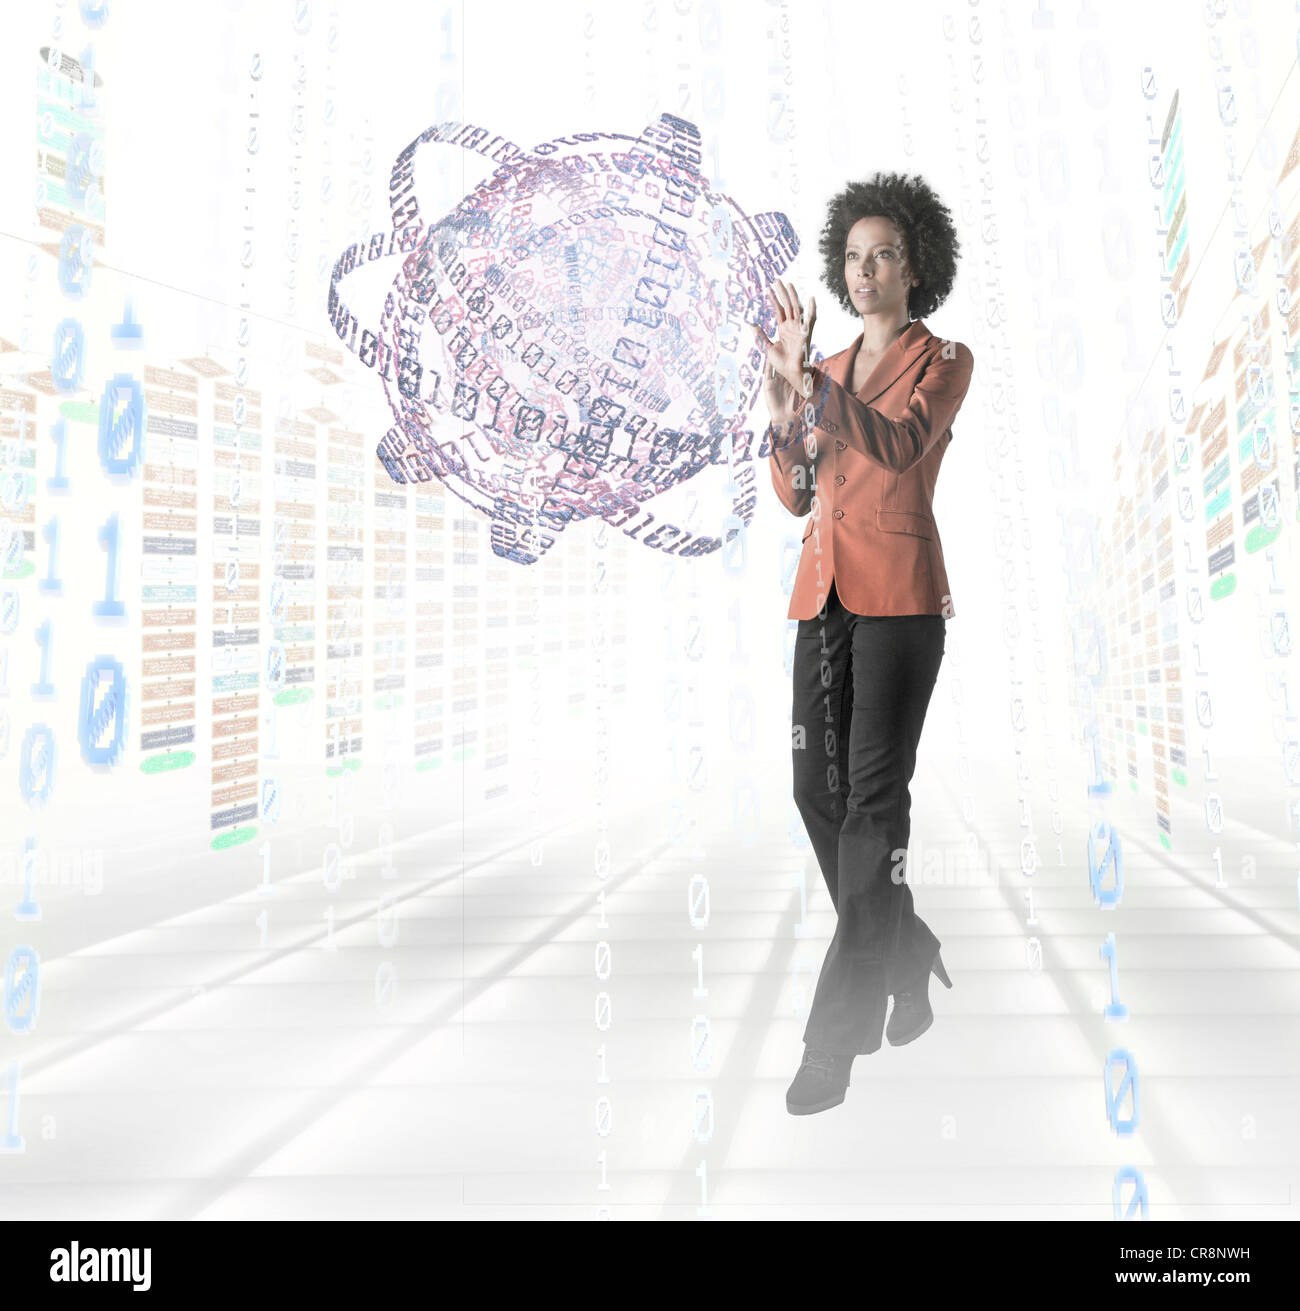 Businesswoman standing amidst digital objects Stock Photo